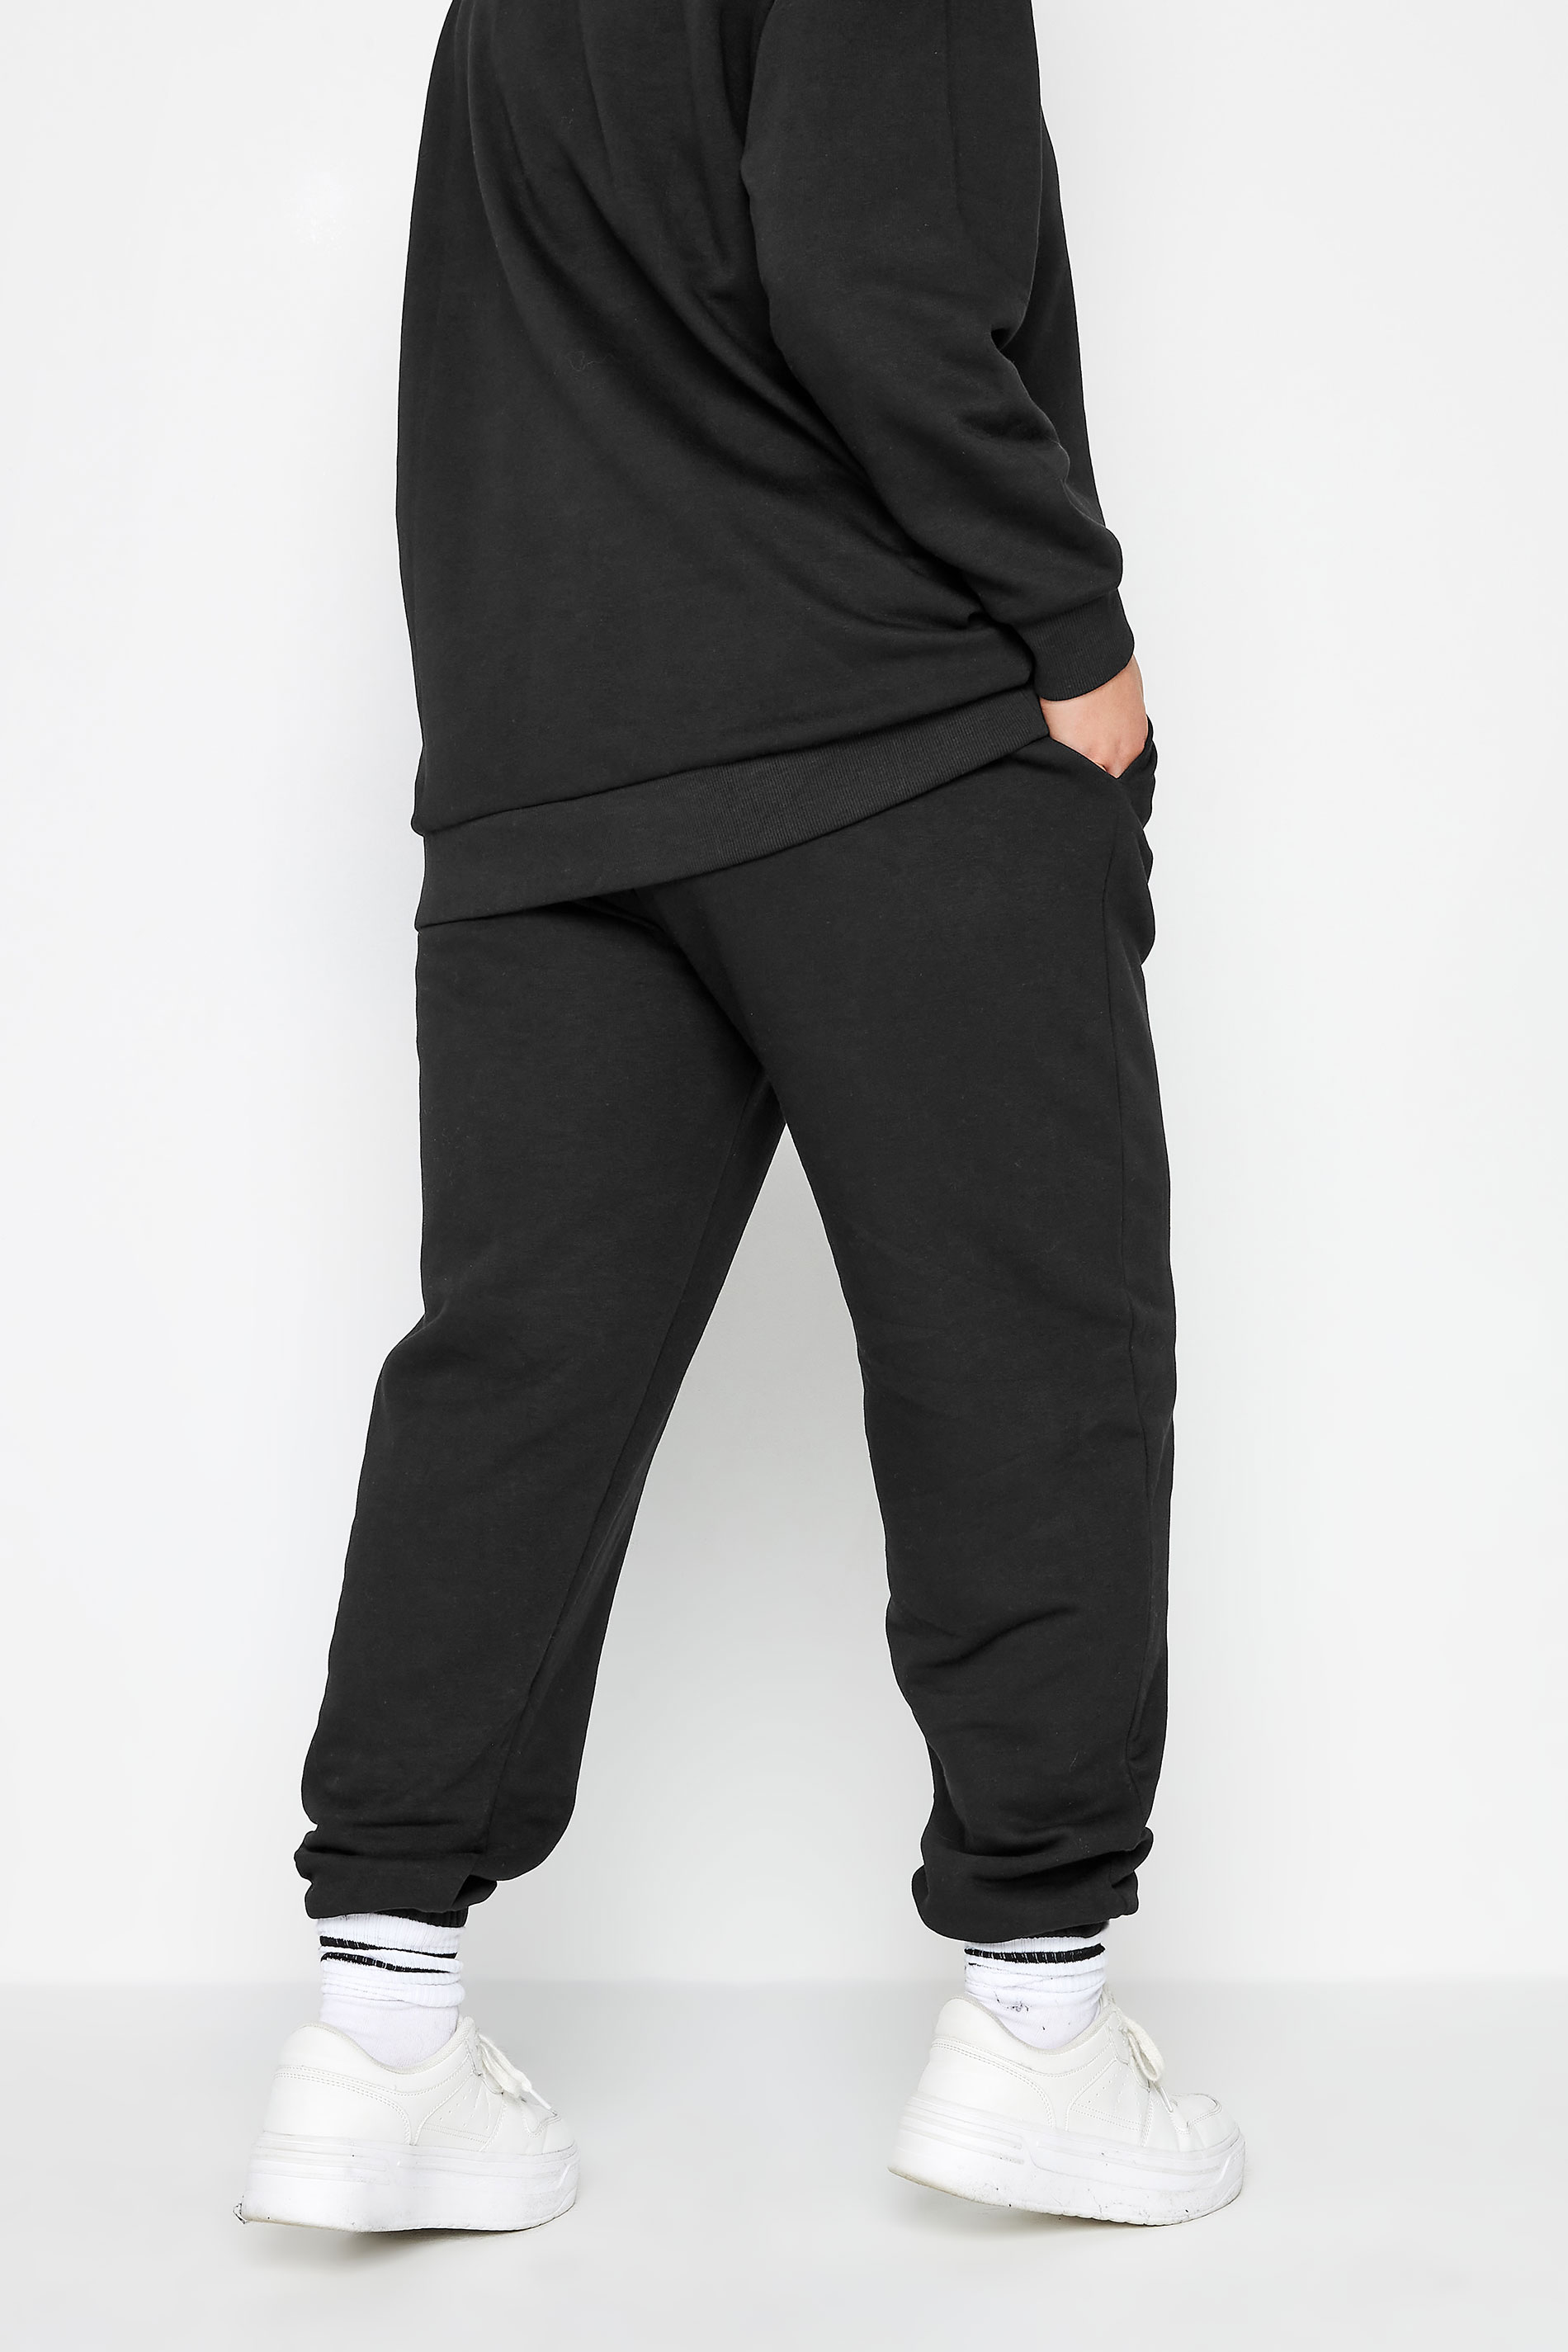 YOURS Curve Black Cuffed Joggers | Yours Clothing 3